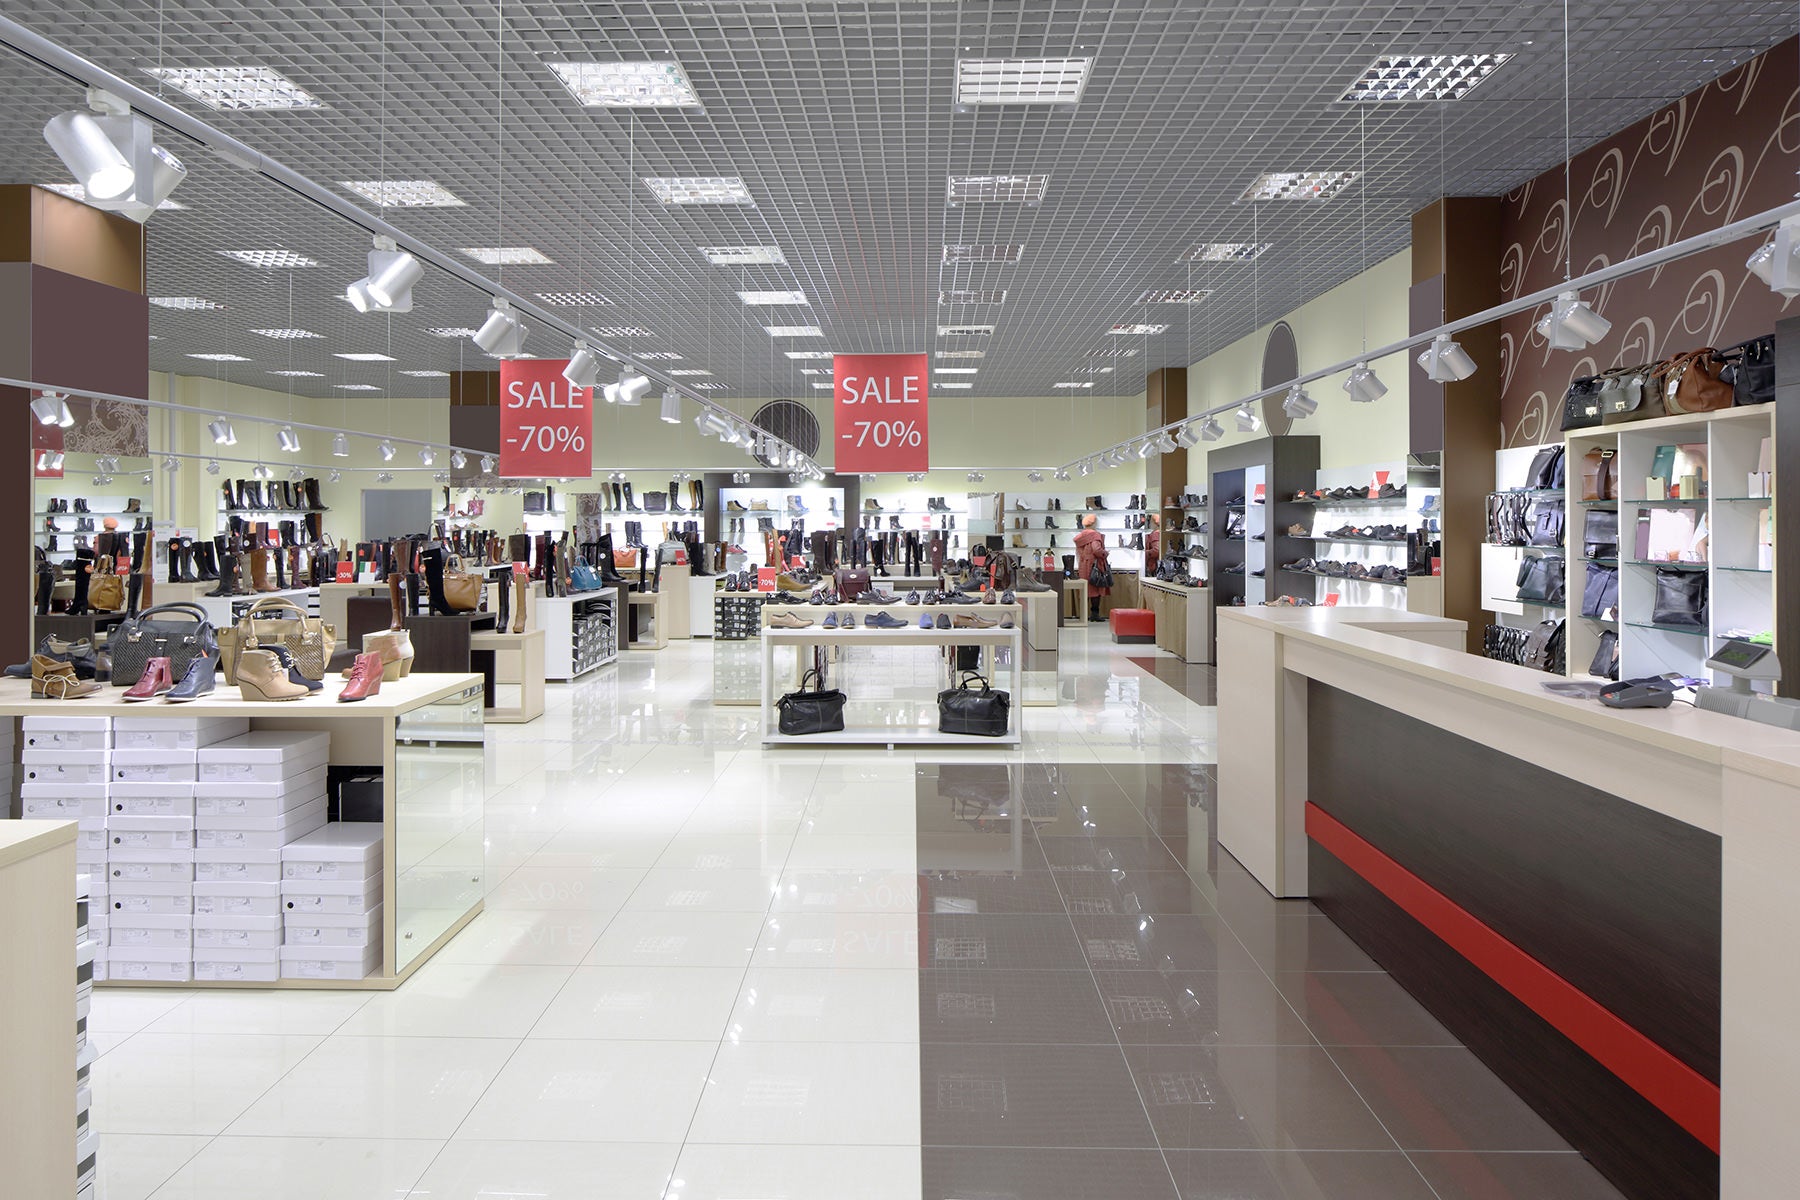 Are We Witnessing the Demise of Department Stores?